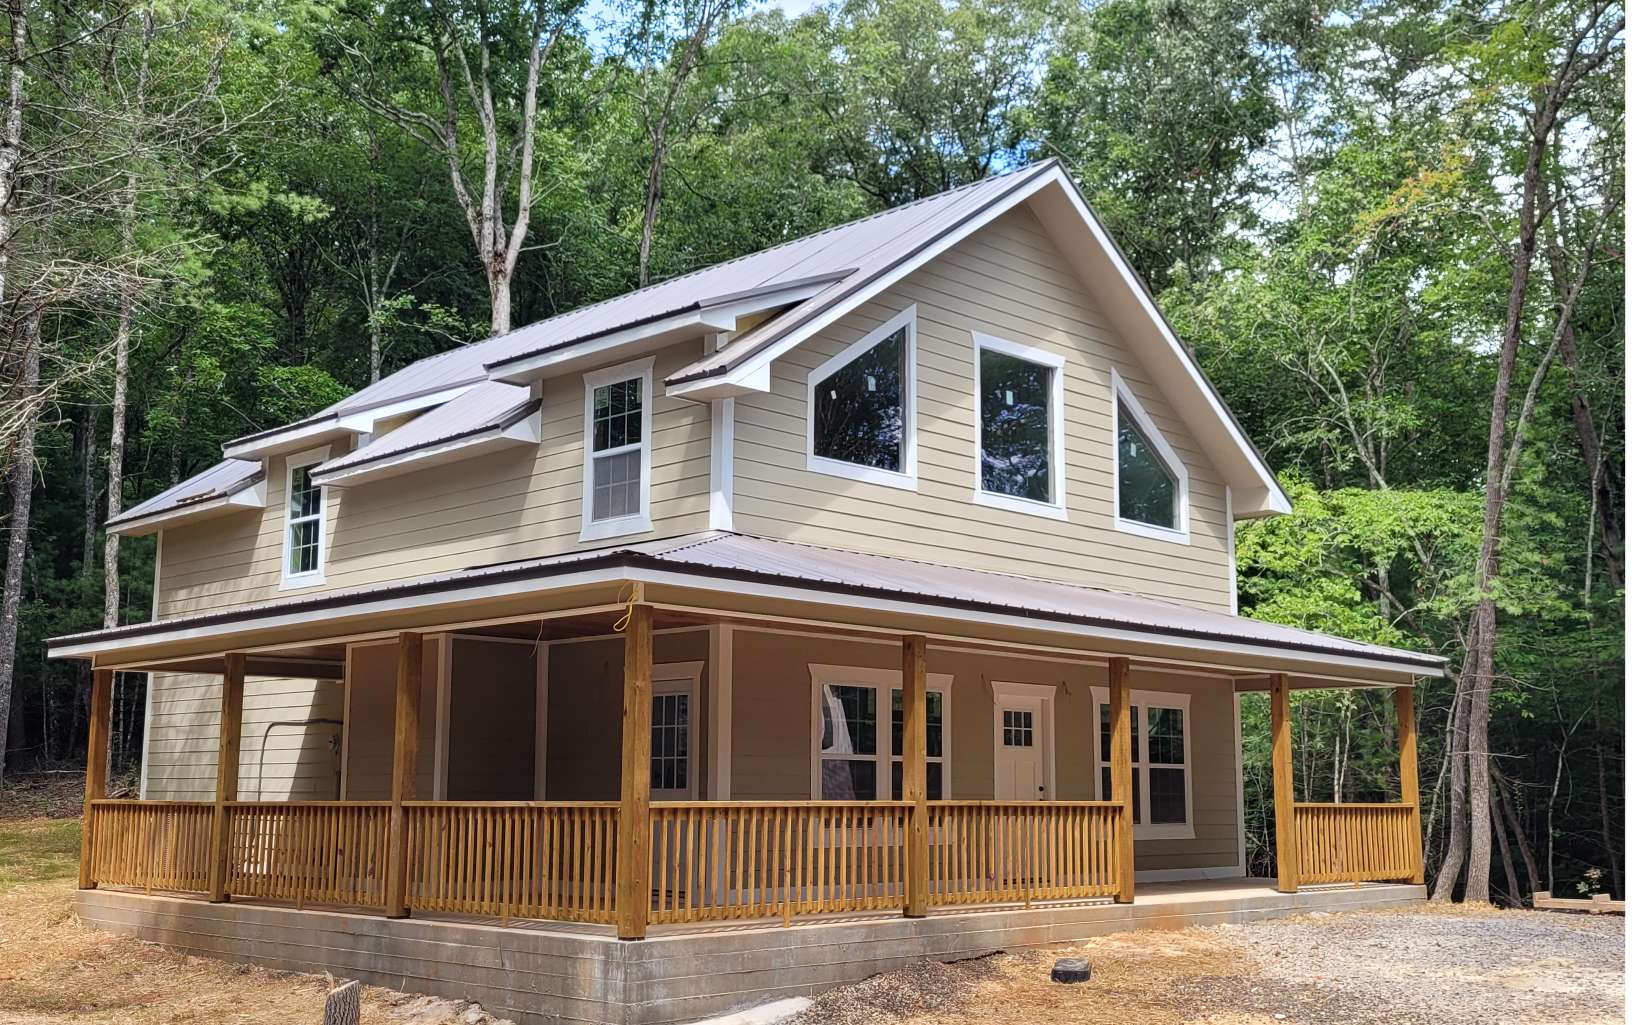 New Construction! Craftsman Farmhouse in quiet neighborhood with deeded access to Fightingtown Creek. This 3 bedroom/ 3 1/2 bath features a master suite on Main level, walk-in pantry, and office/loft area in addition to the 2 upstairs bedrooms, each with bath. Short term rentals allowed!